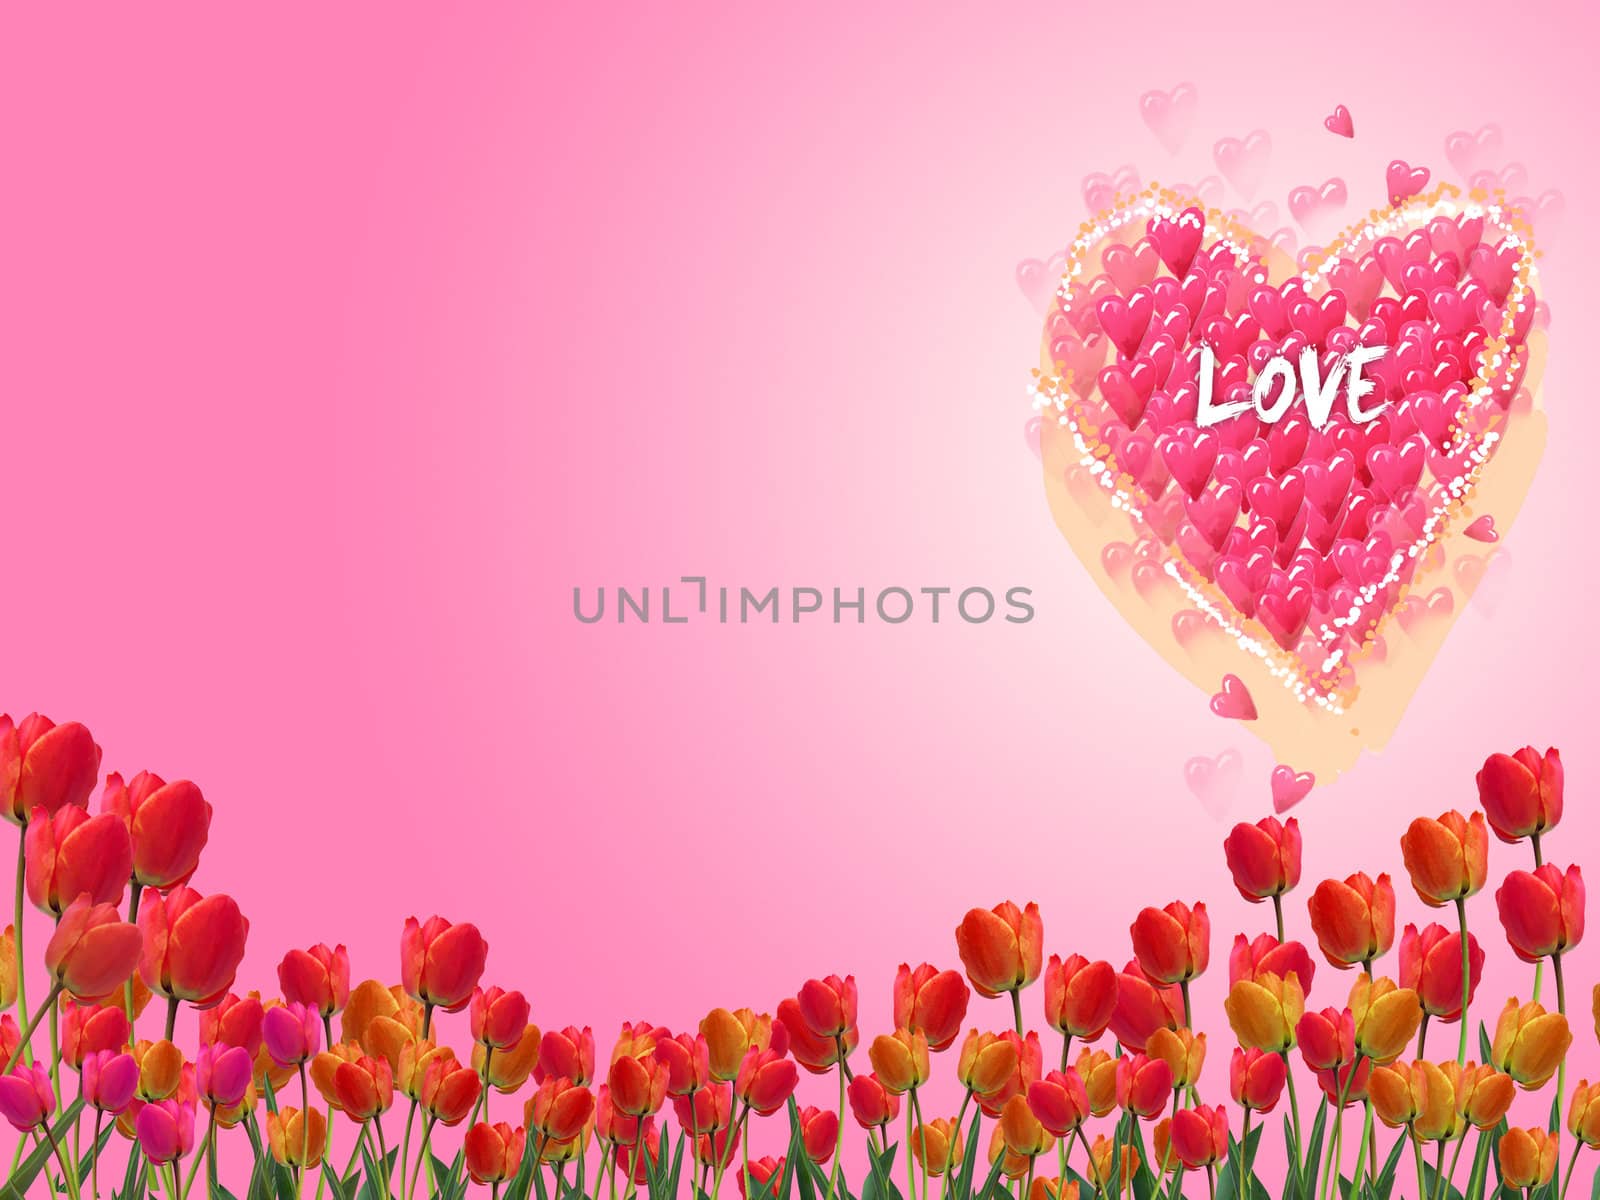 Tulips on pink background. Clipping path